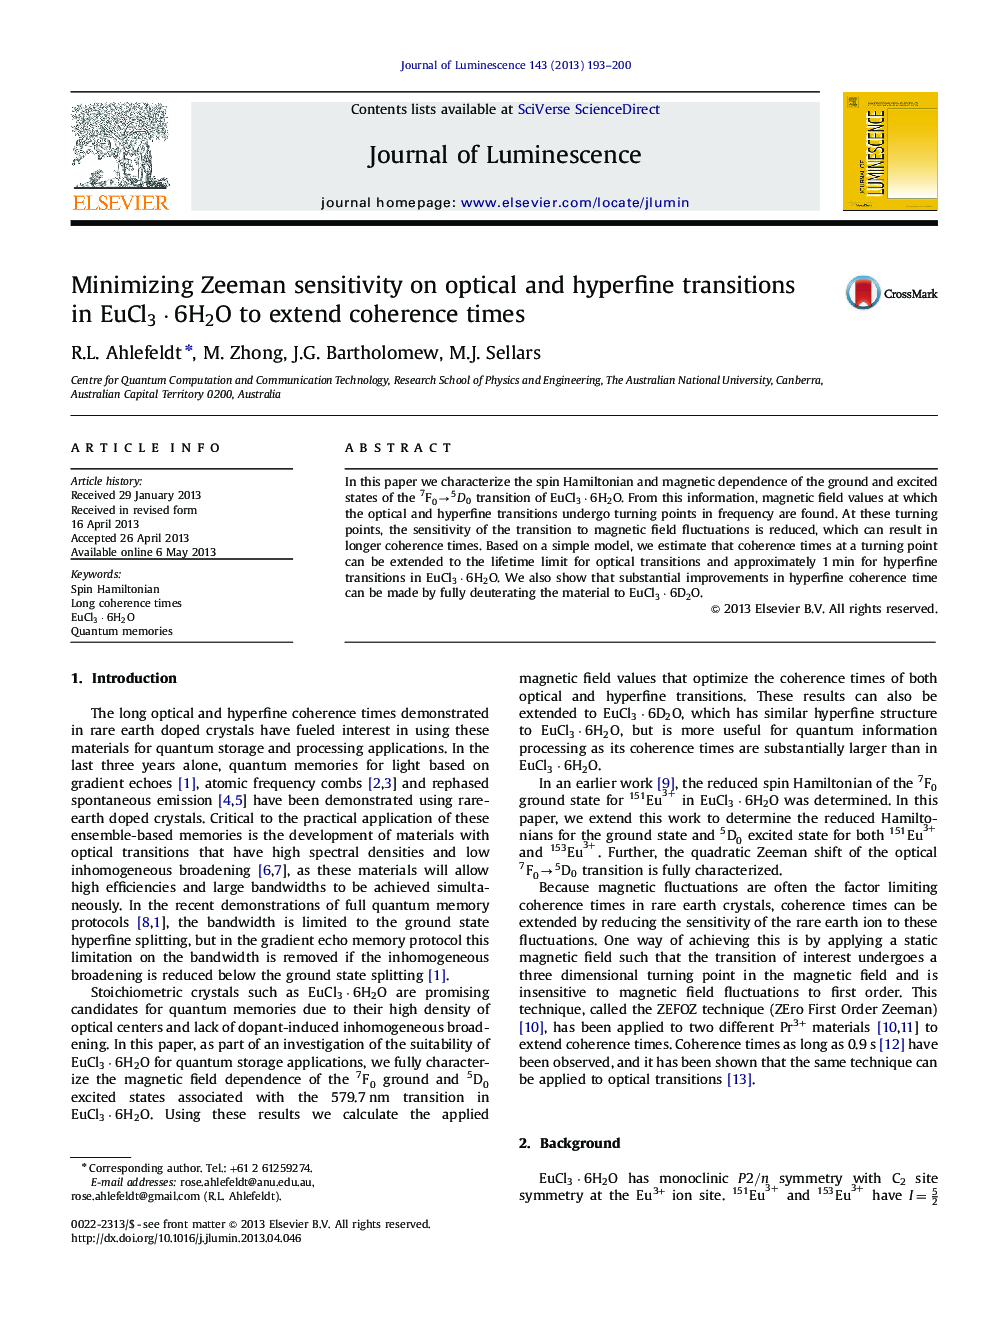 Minimizing Zeeman sensitivity on optical and hyperfine transitions in EuCl3Â·6H2O to extend coherence times